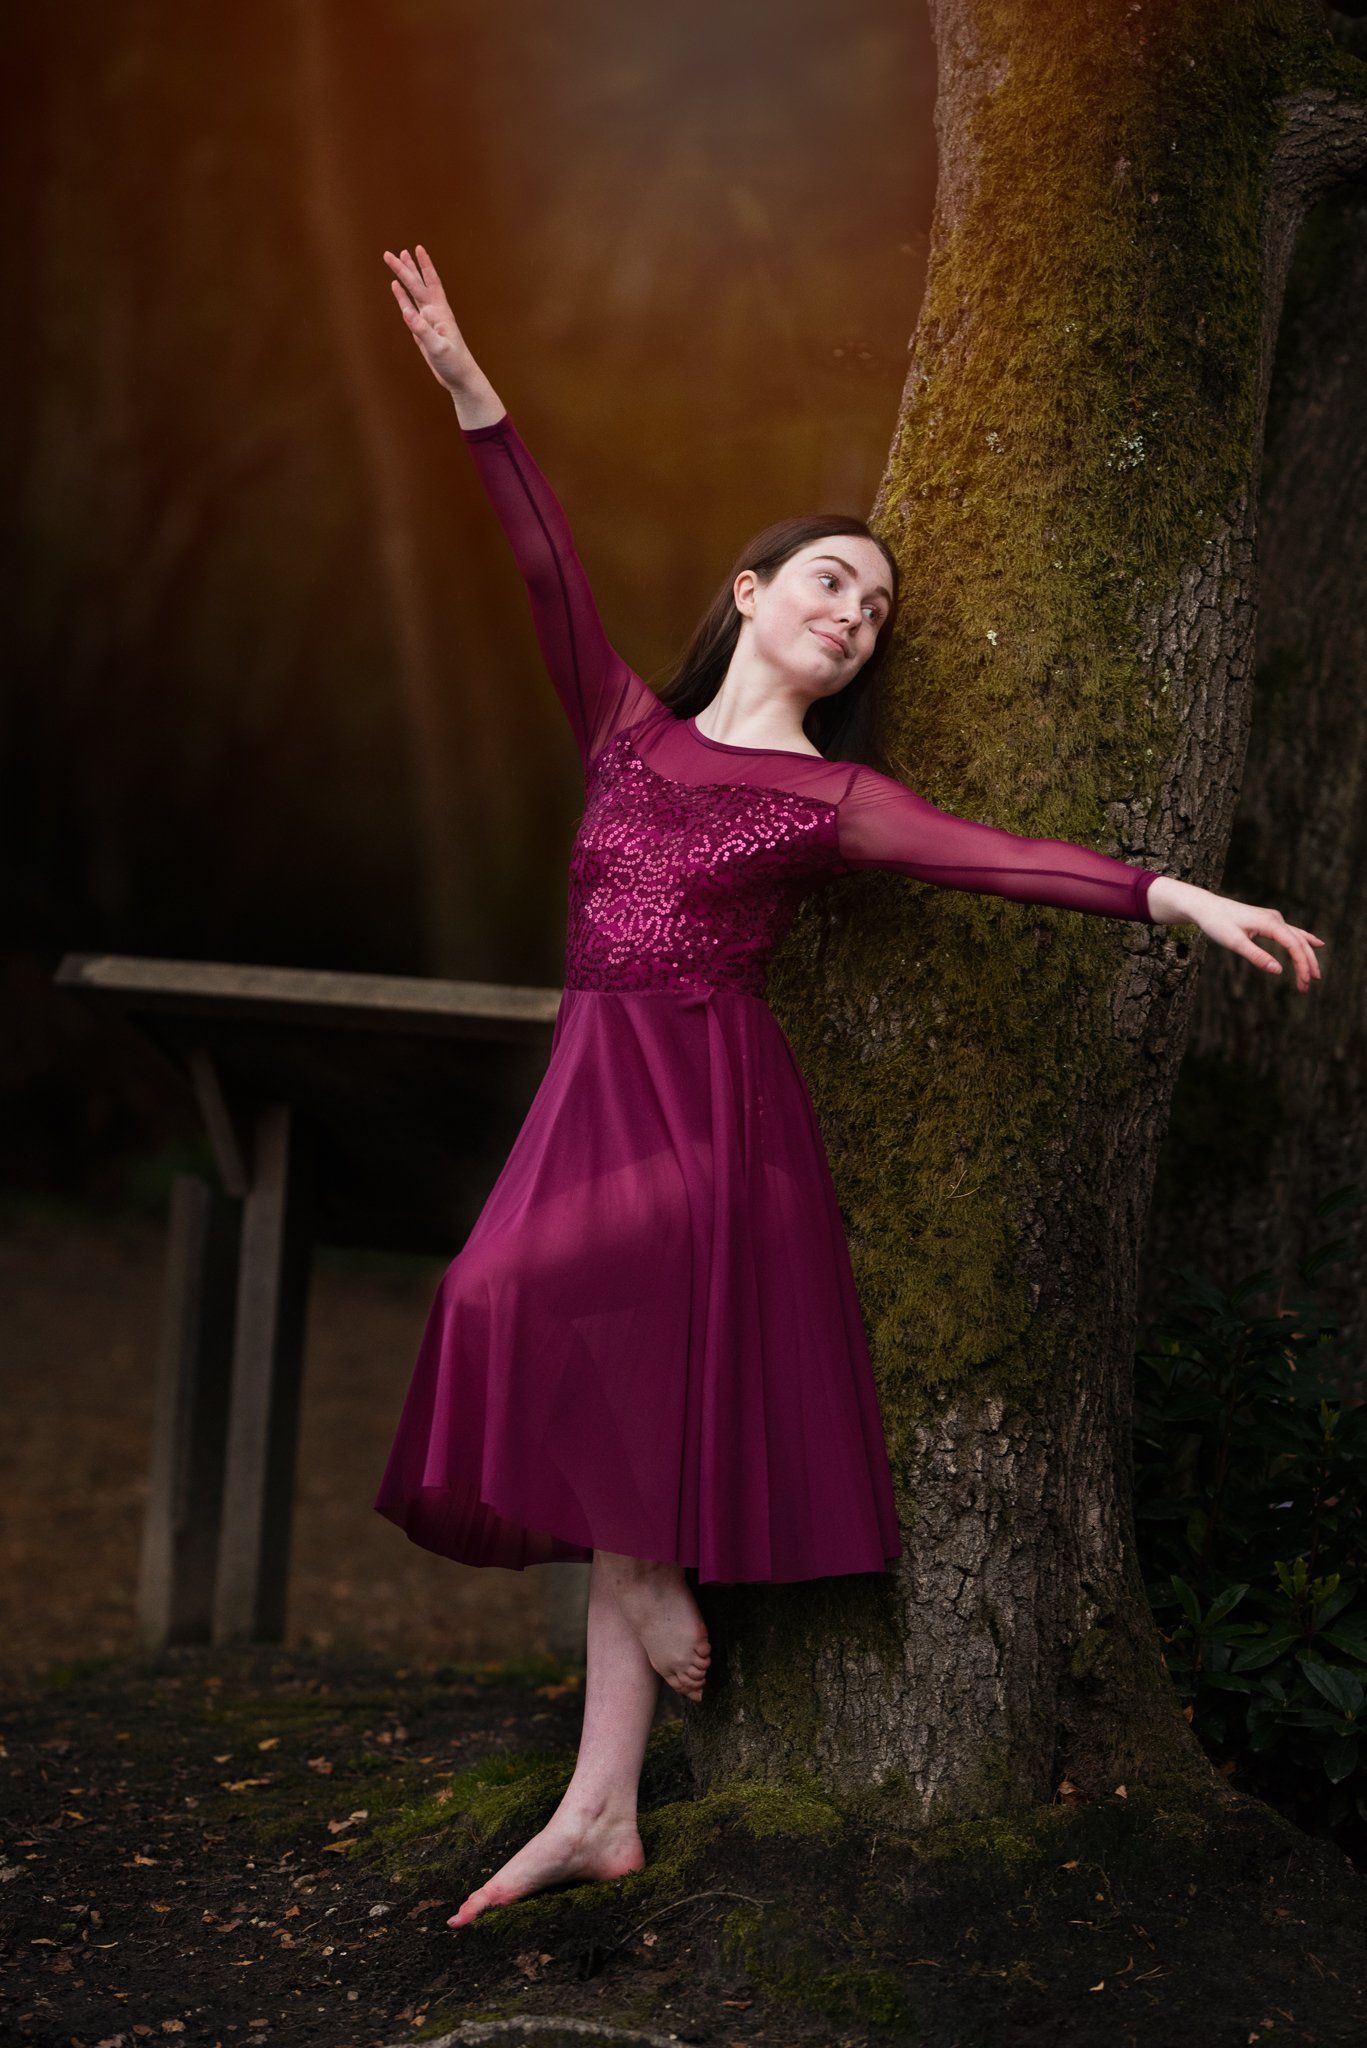 Dancer in the forest at one with nature